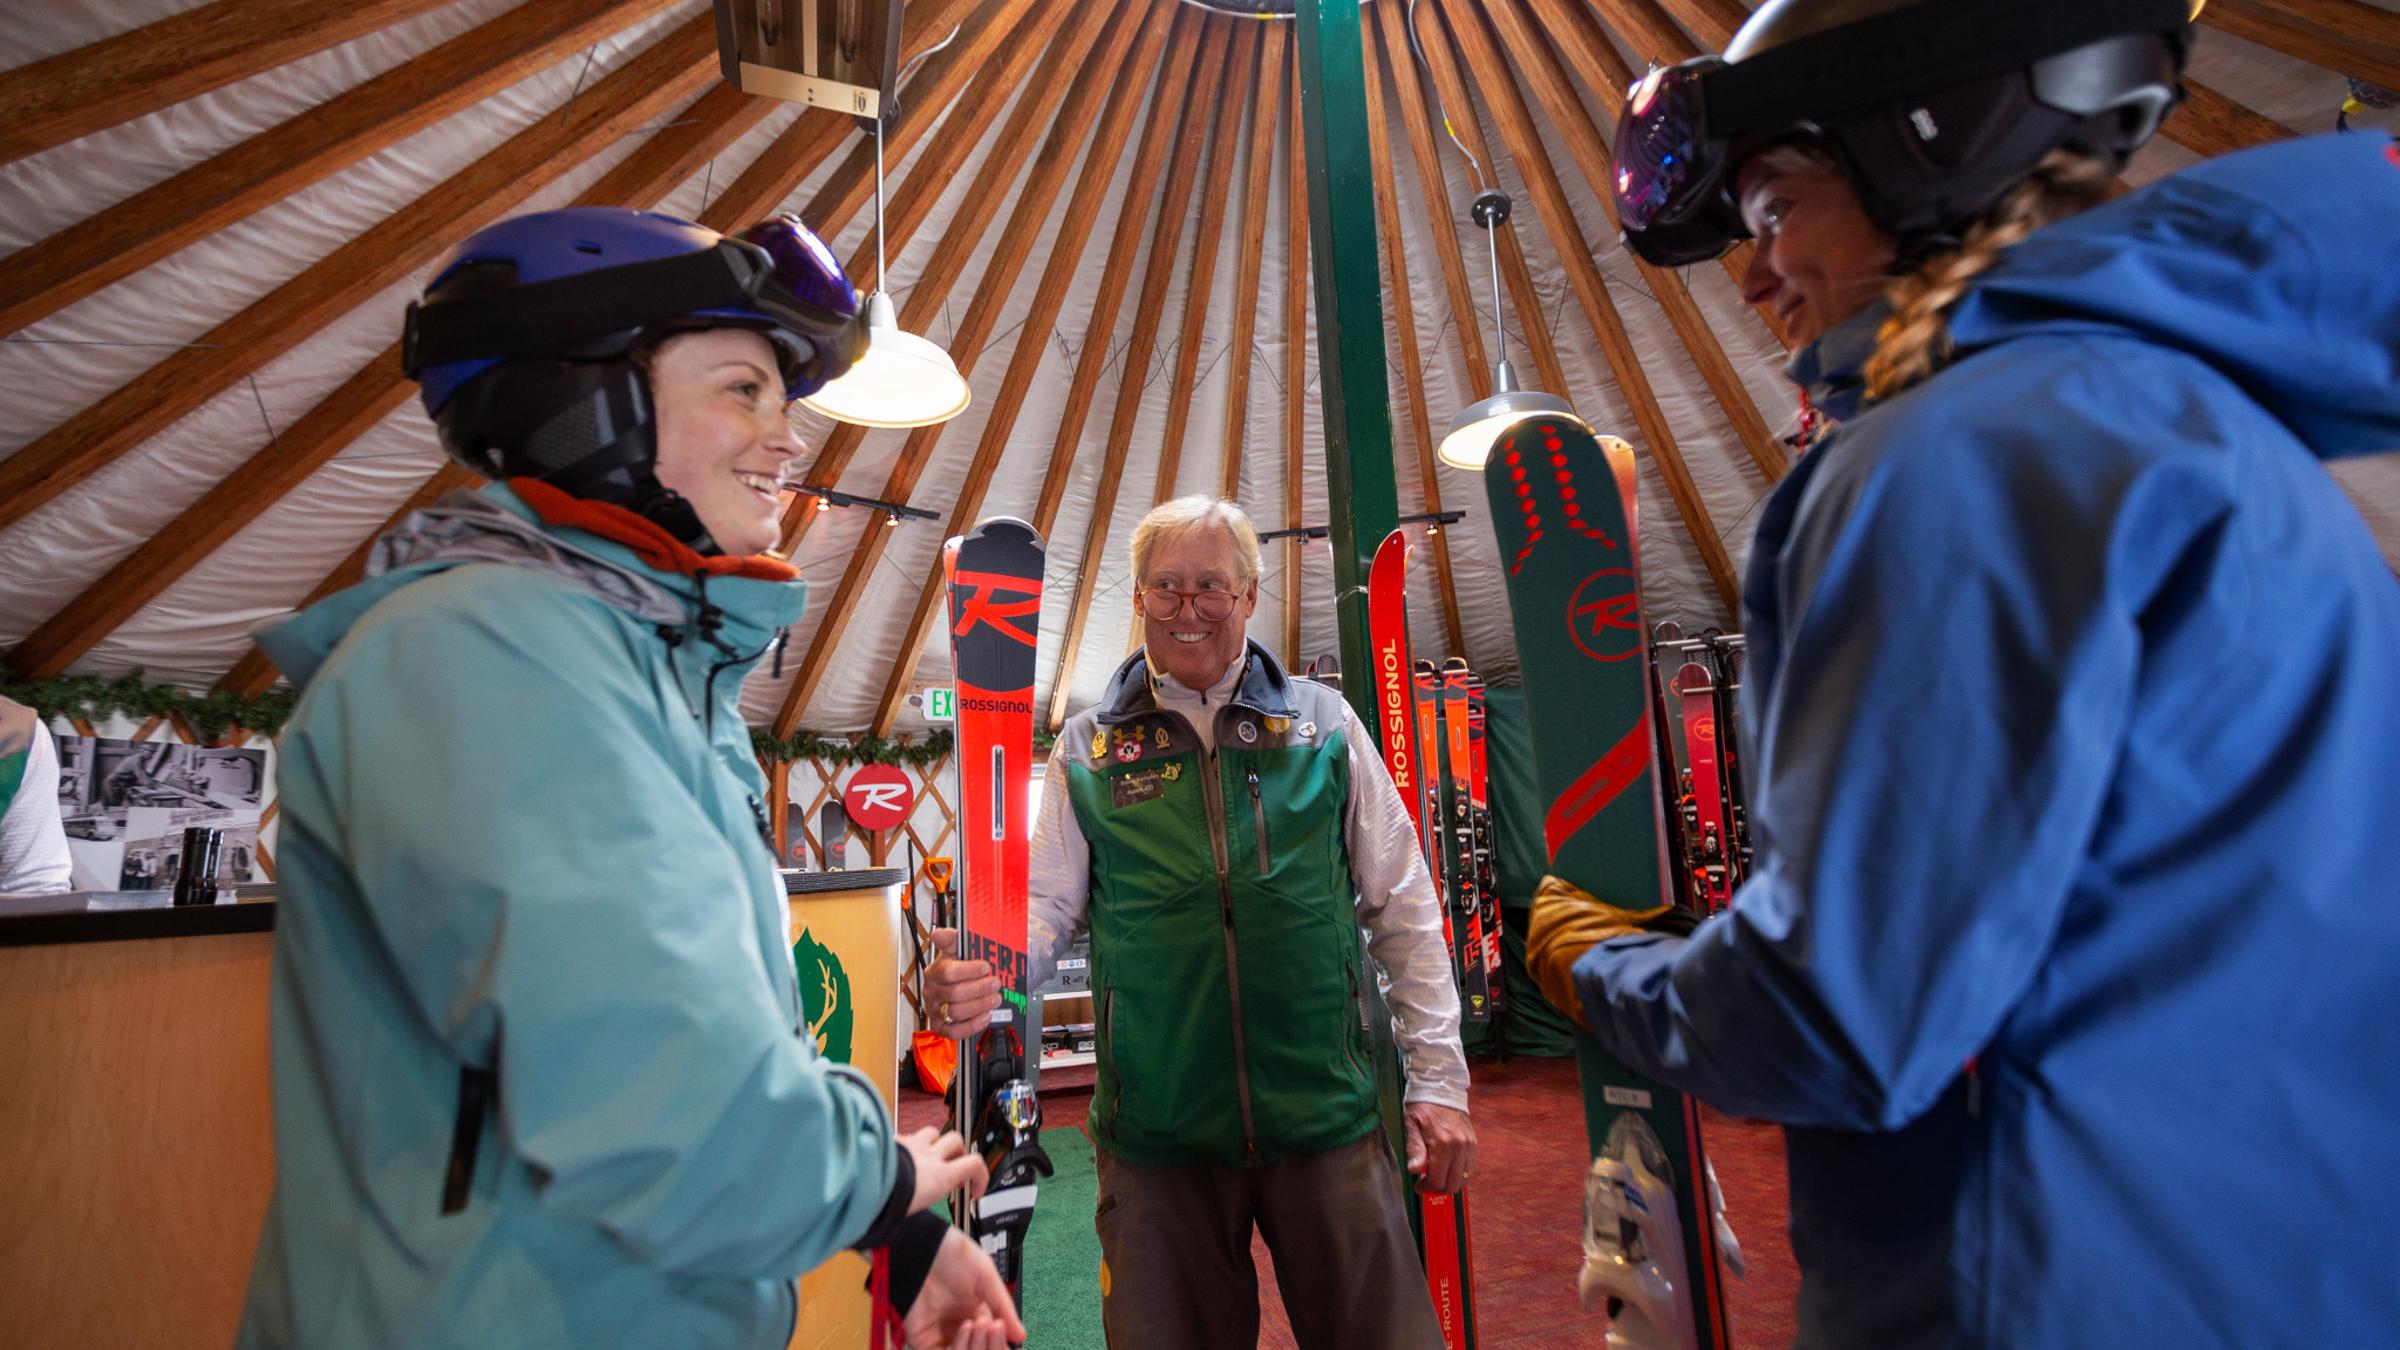 Two guests receiving skis at the Rossignol High Performance Test Yurt